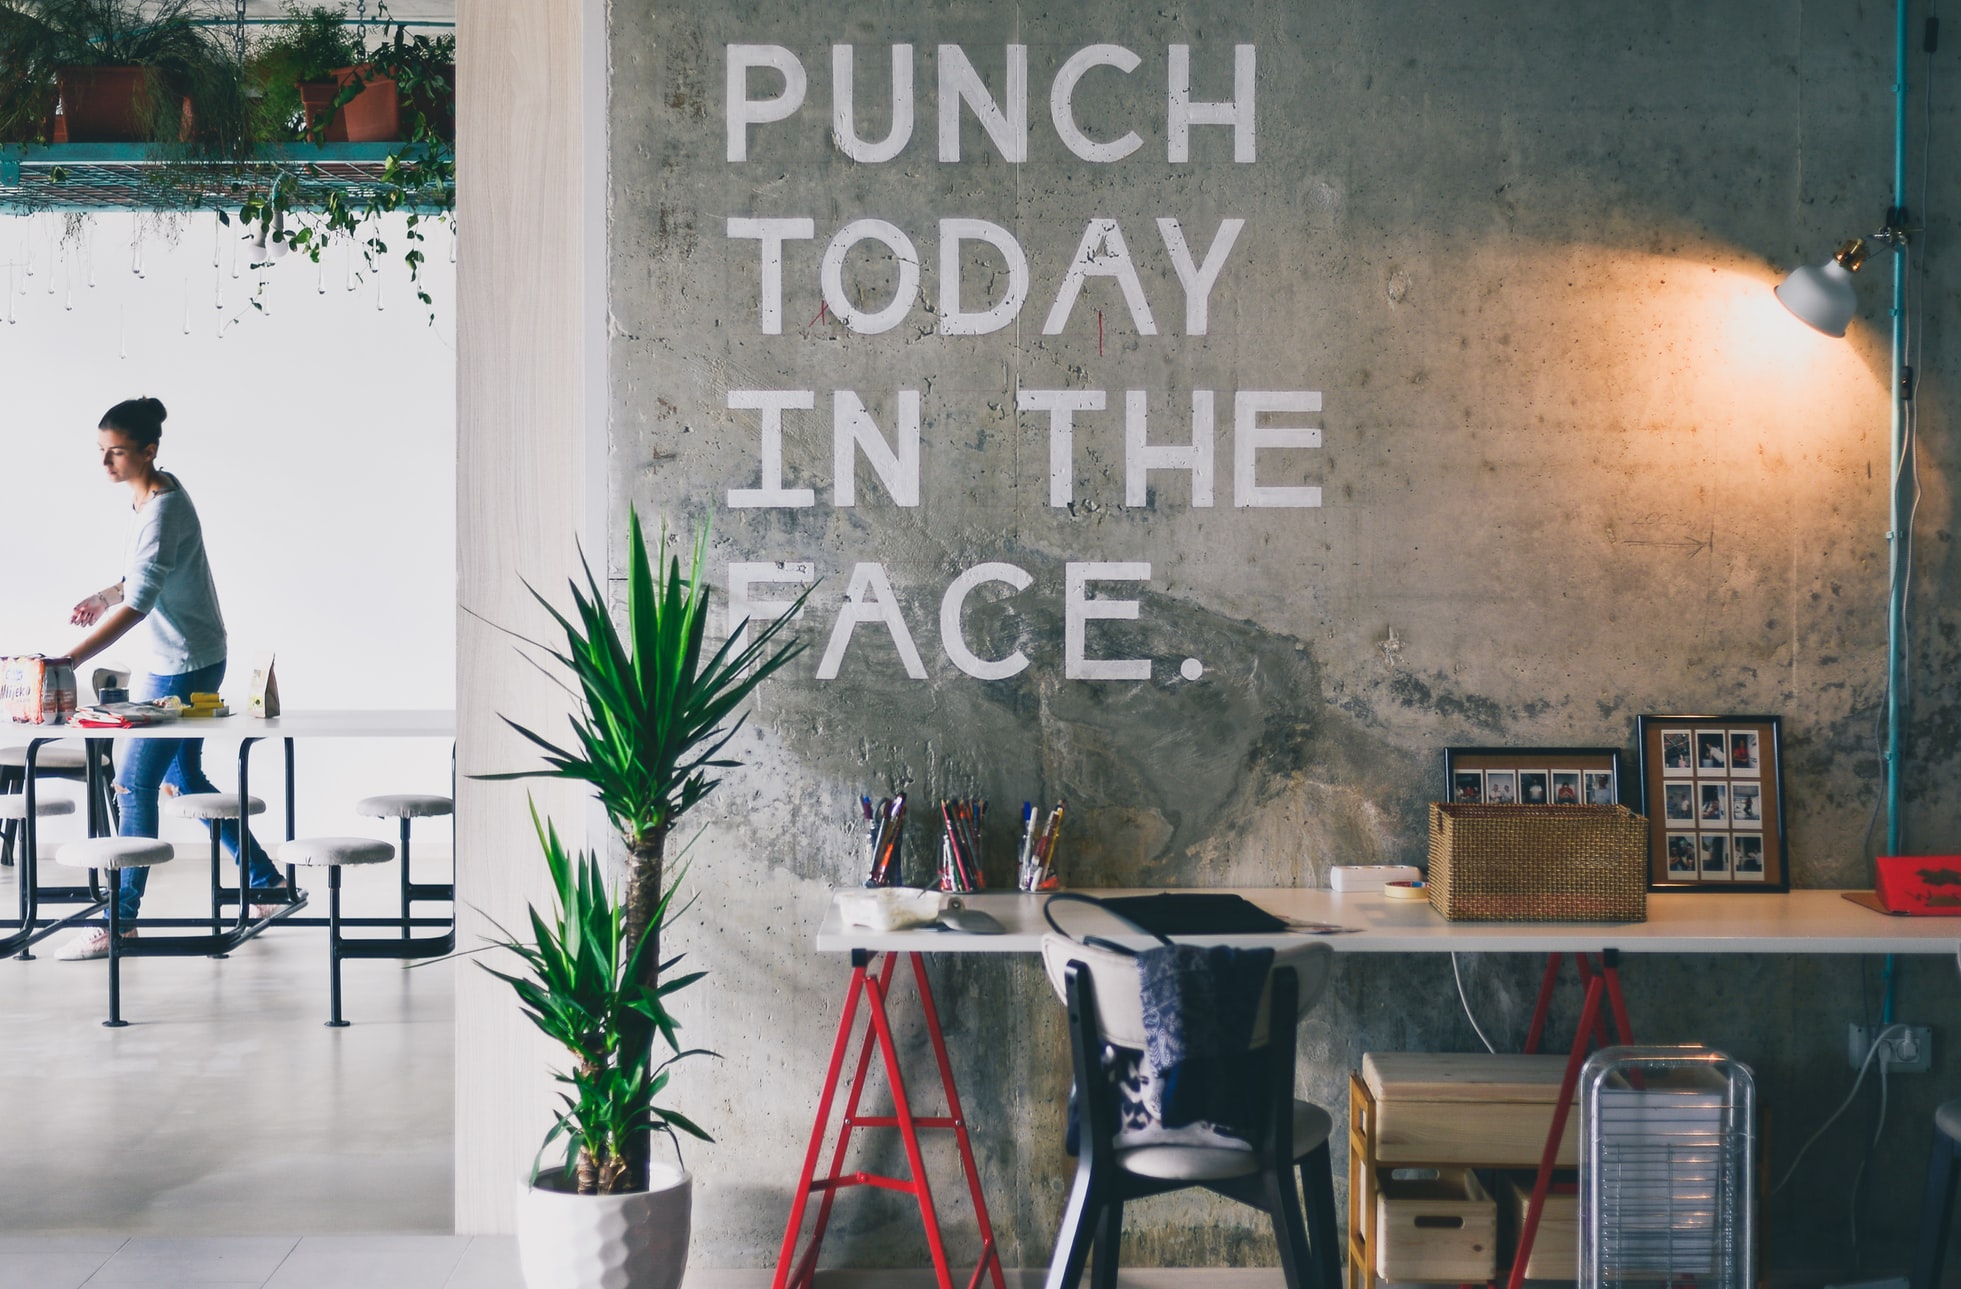 a motivational quote on the wall that says "Punch today in the face"